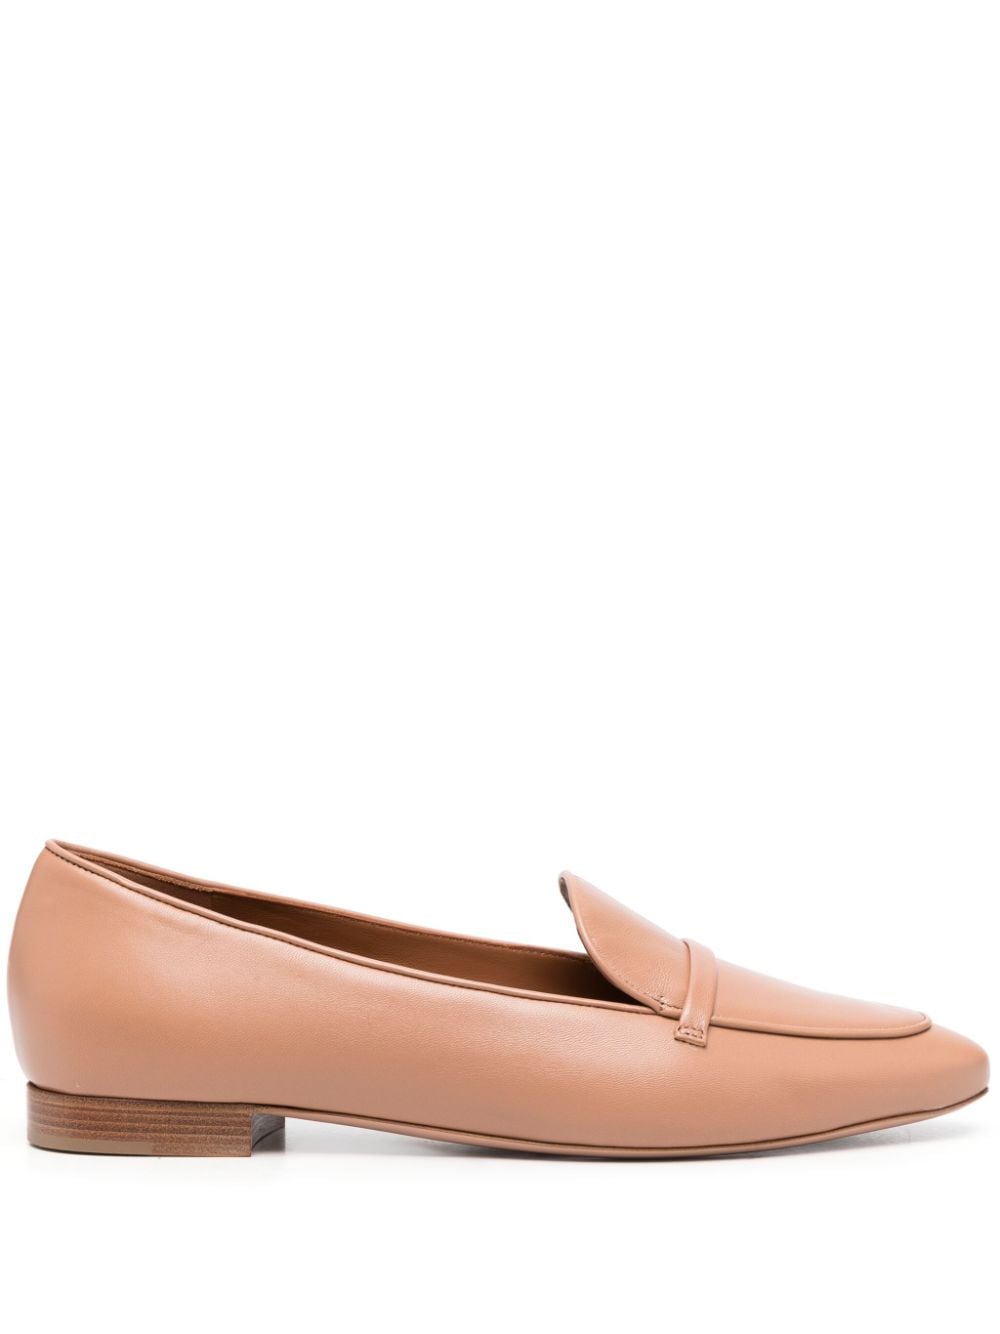 Malone Souliers Bruni Loafer - Nude von Malone Souliers